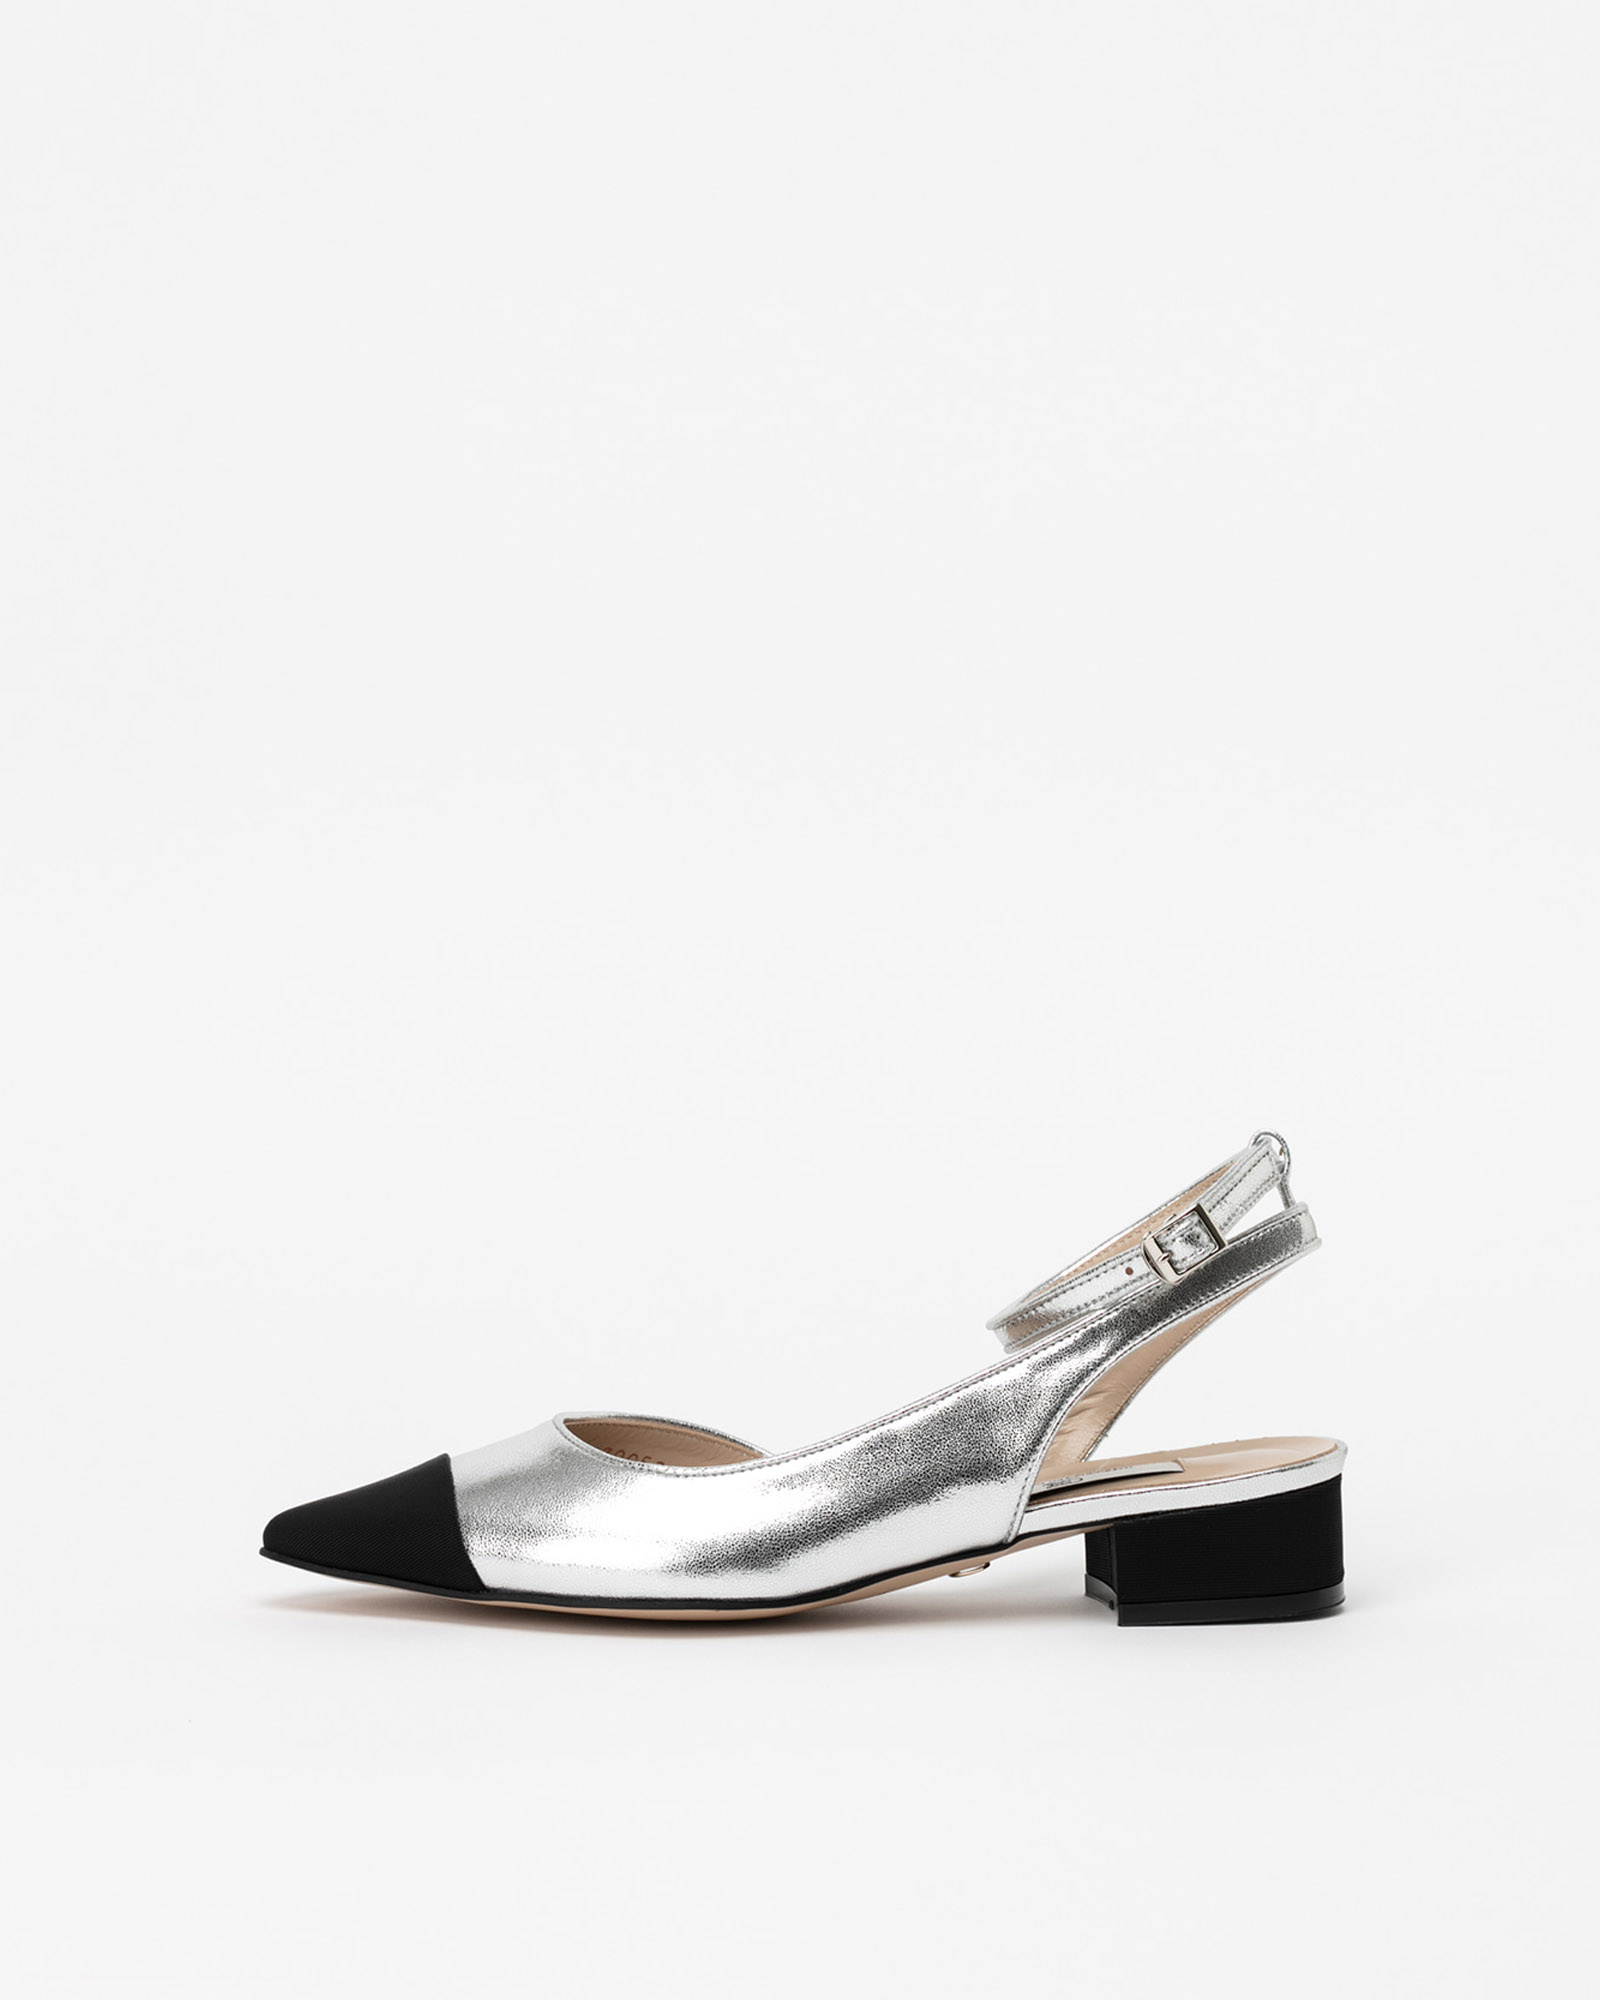 Banelia Strap Flat Shoes in Champagne Silver